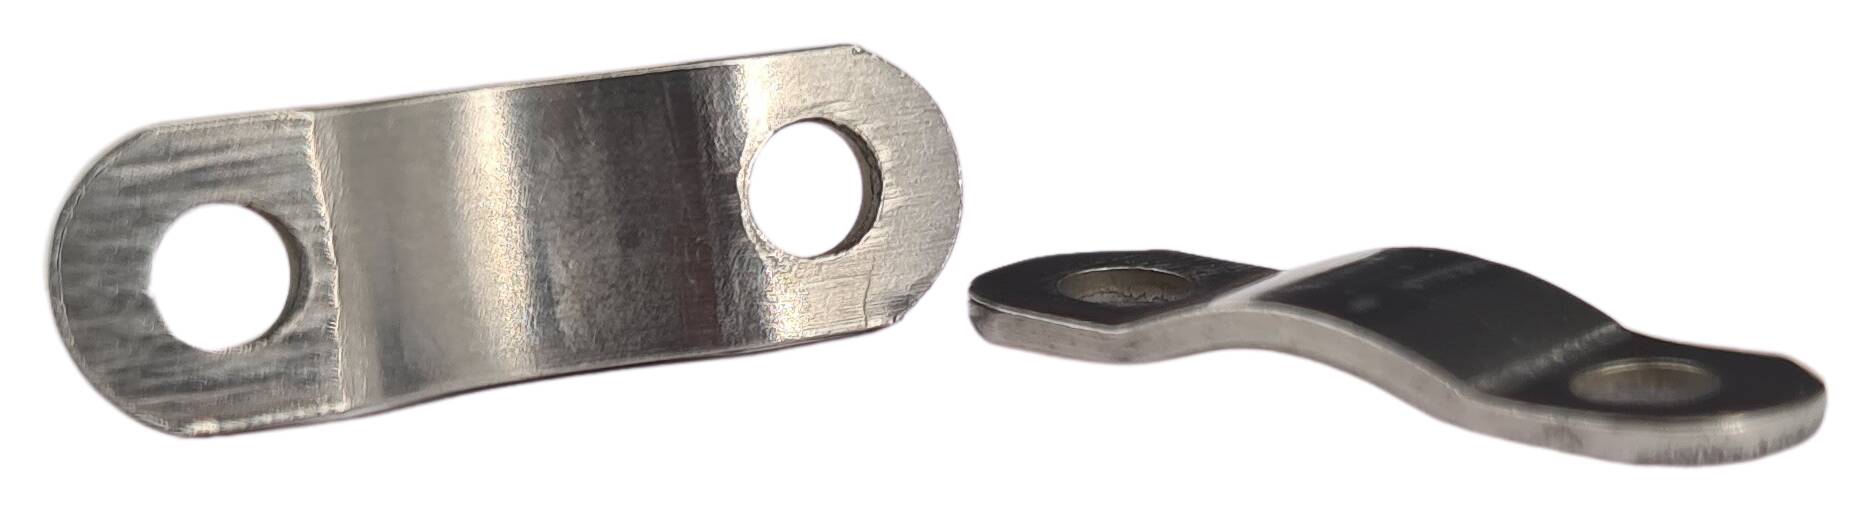 iron clamp curved 21,5x7x1 hole distance 14 mm hole Ø ca. 3,2 mm nickel